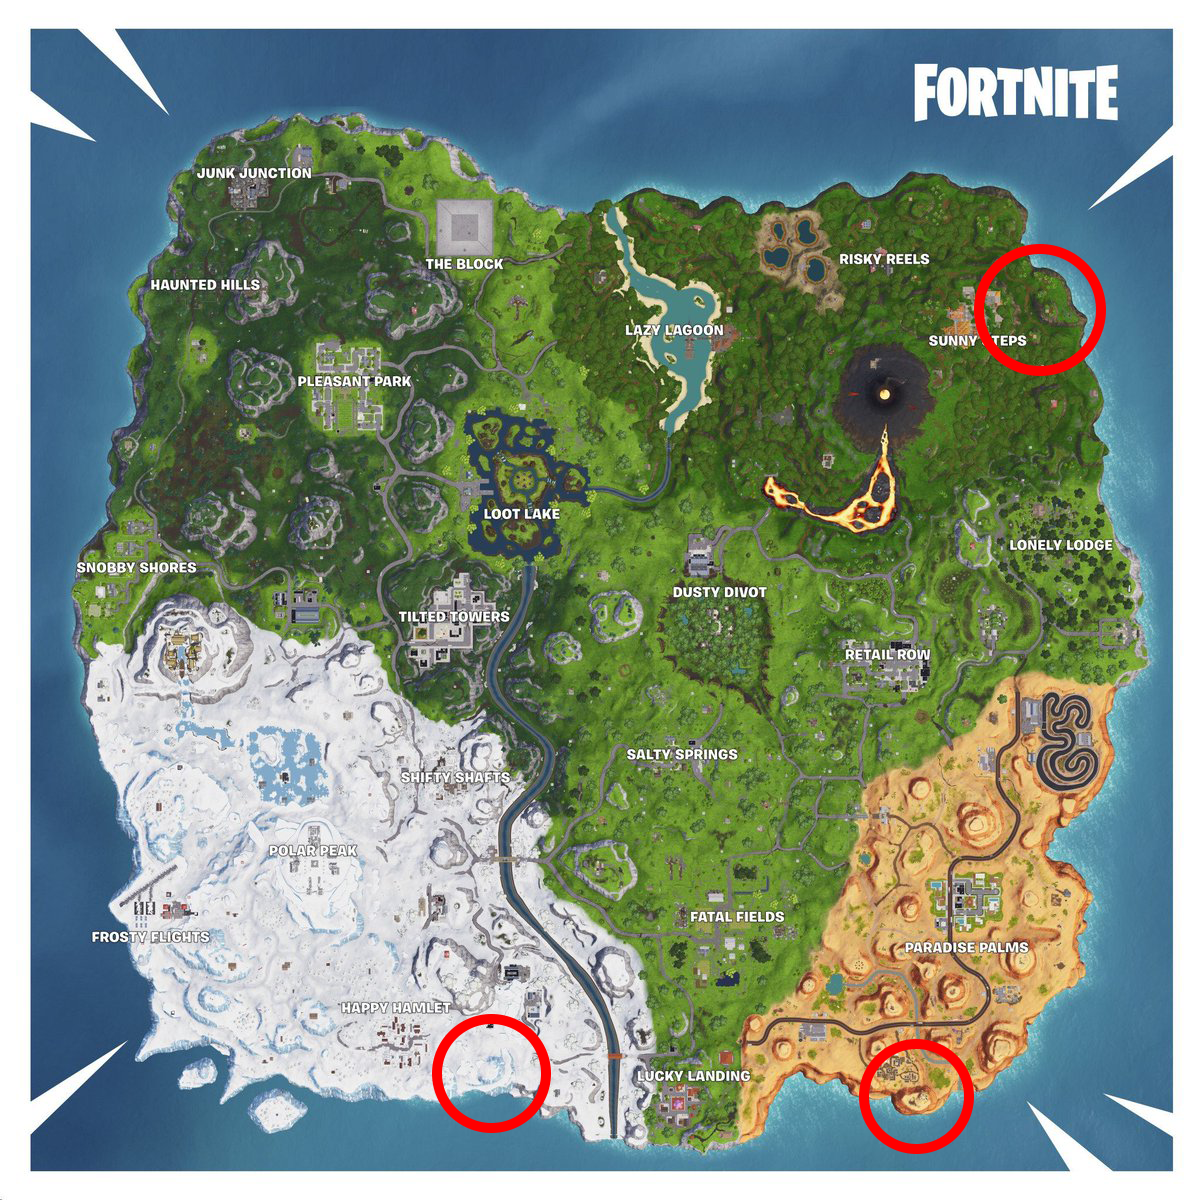 Show Me A Picture Of The Faces In Fortnite Where Are The Giant Faces On Fortnite Map Locations For Season 8 Challenge Sporting News